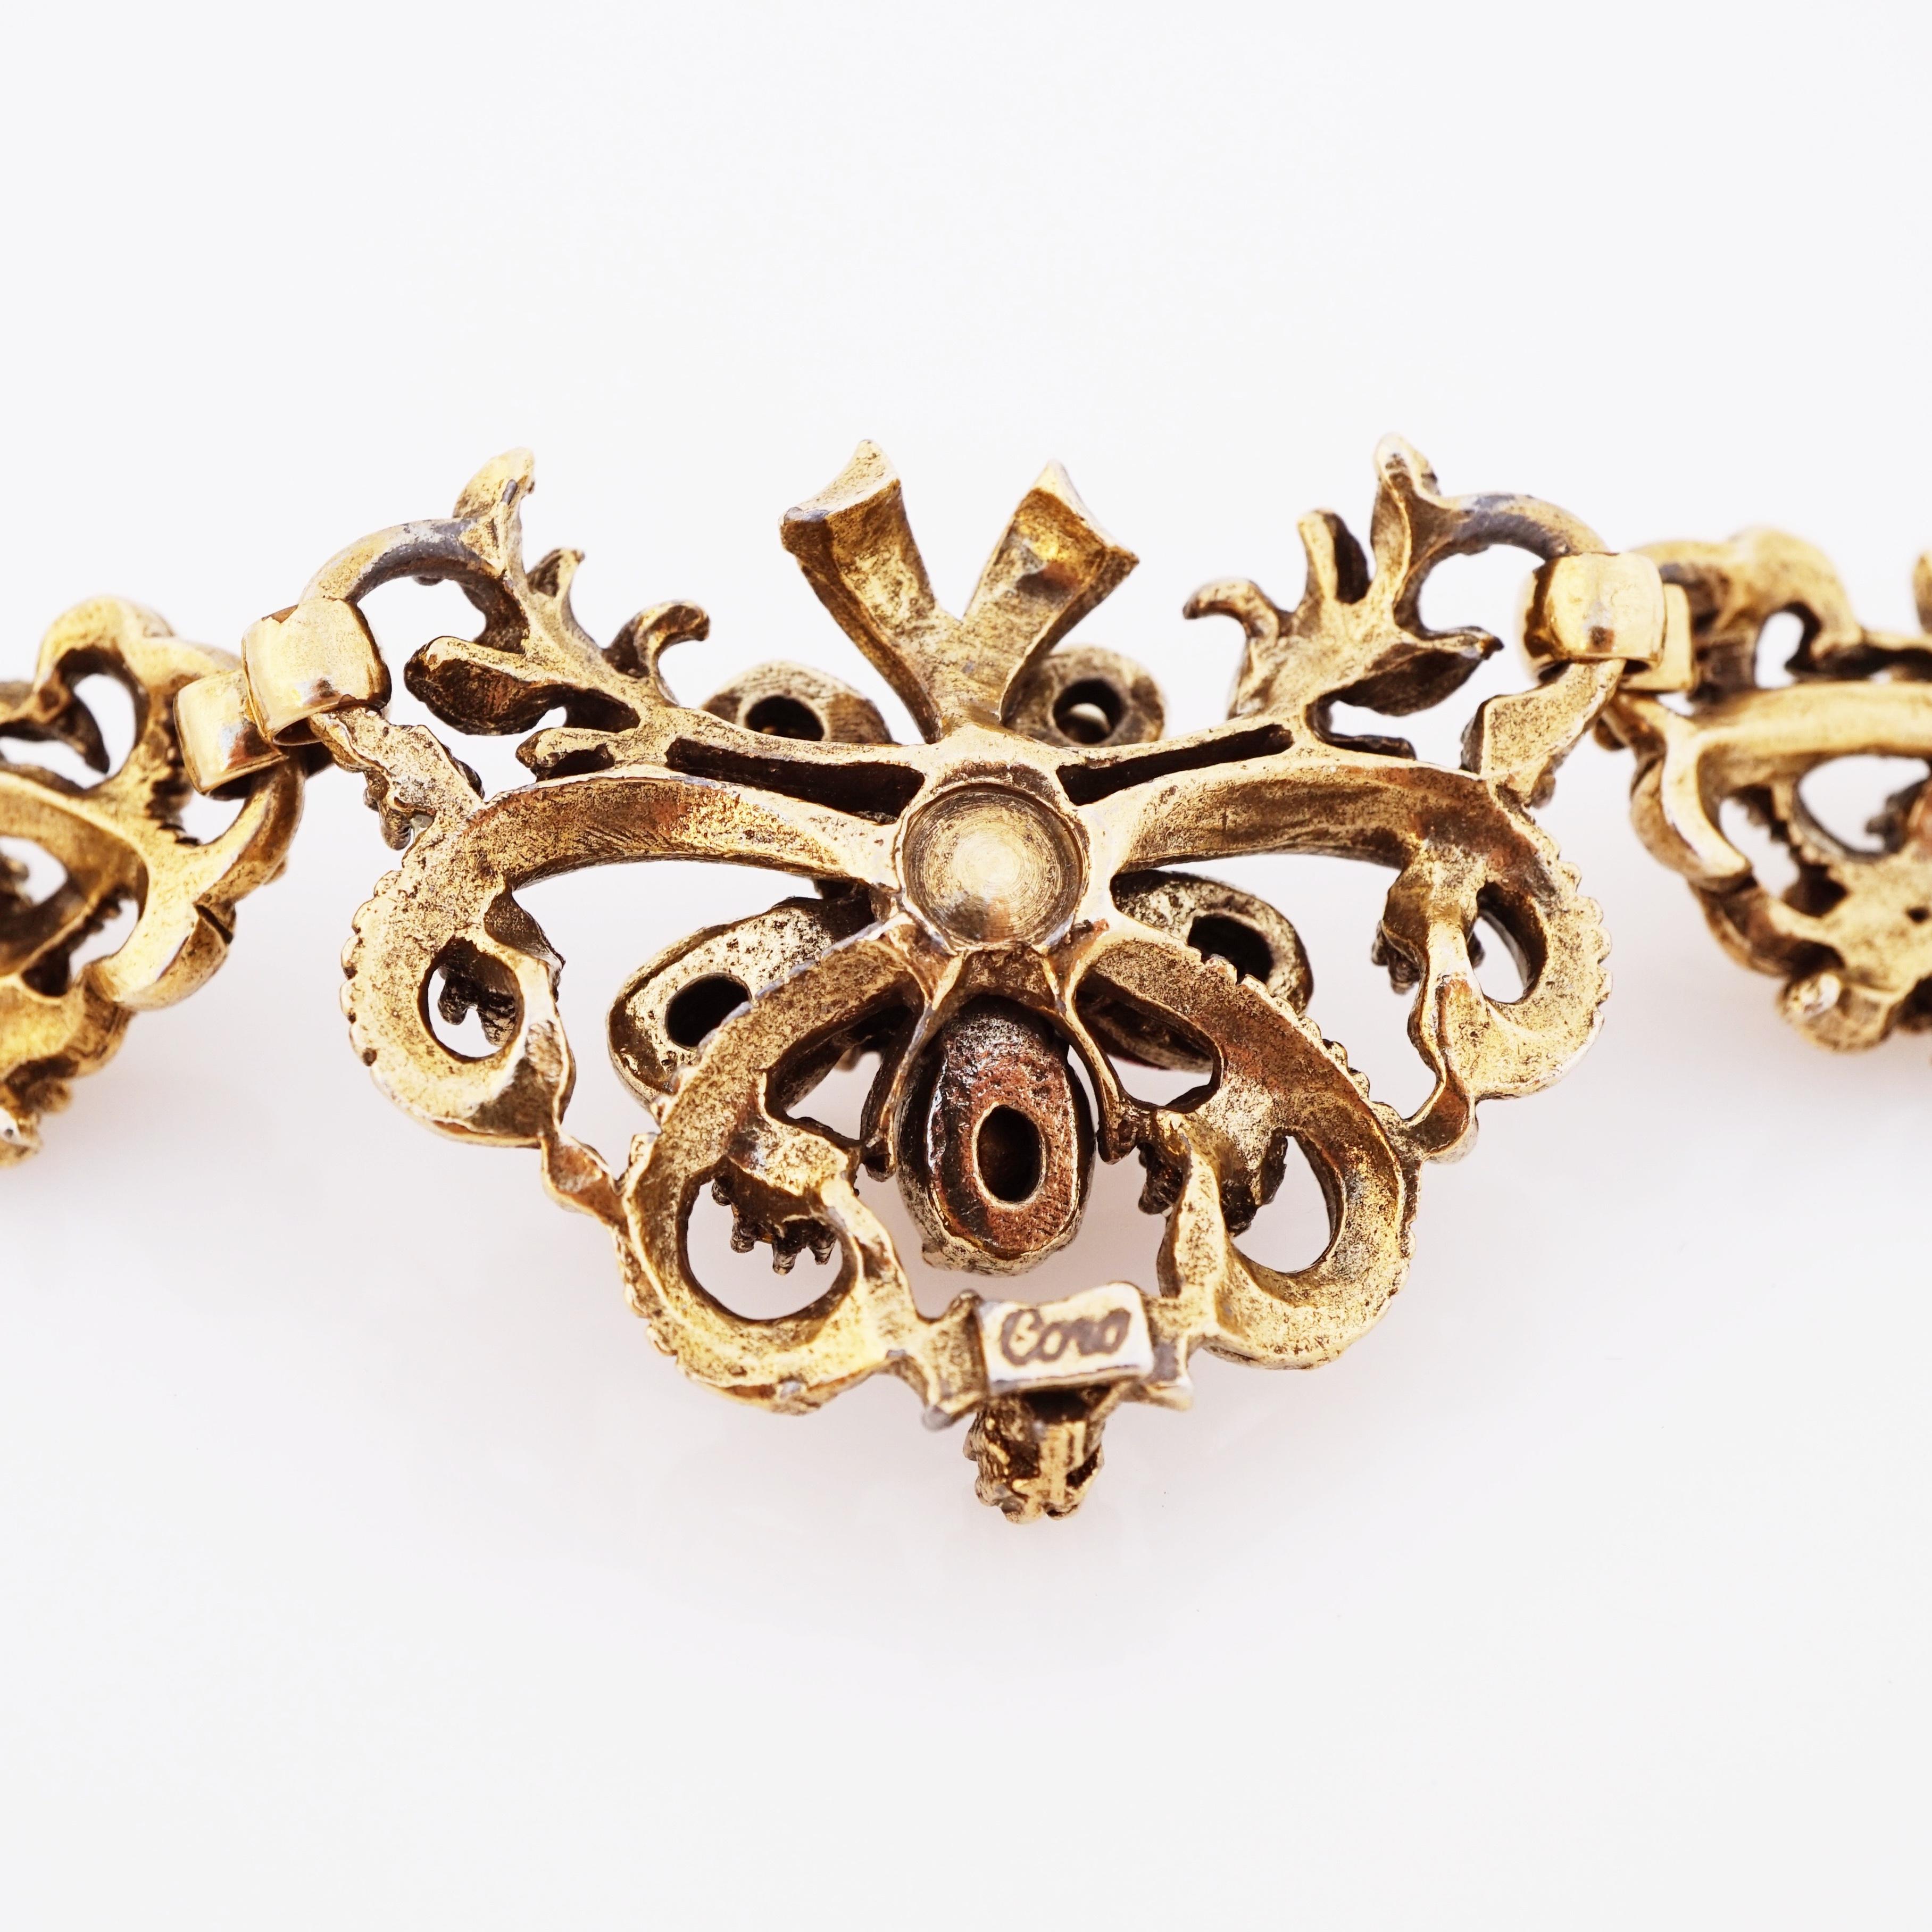 Modern Antique Gold Amethyst Crystal Flower Choker Necklace By Coro, 1950s